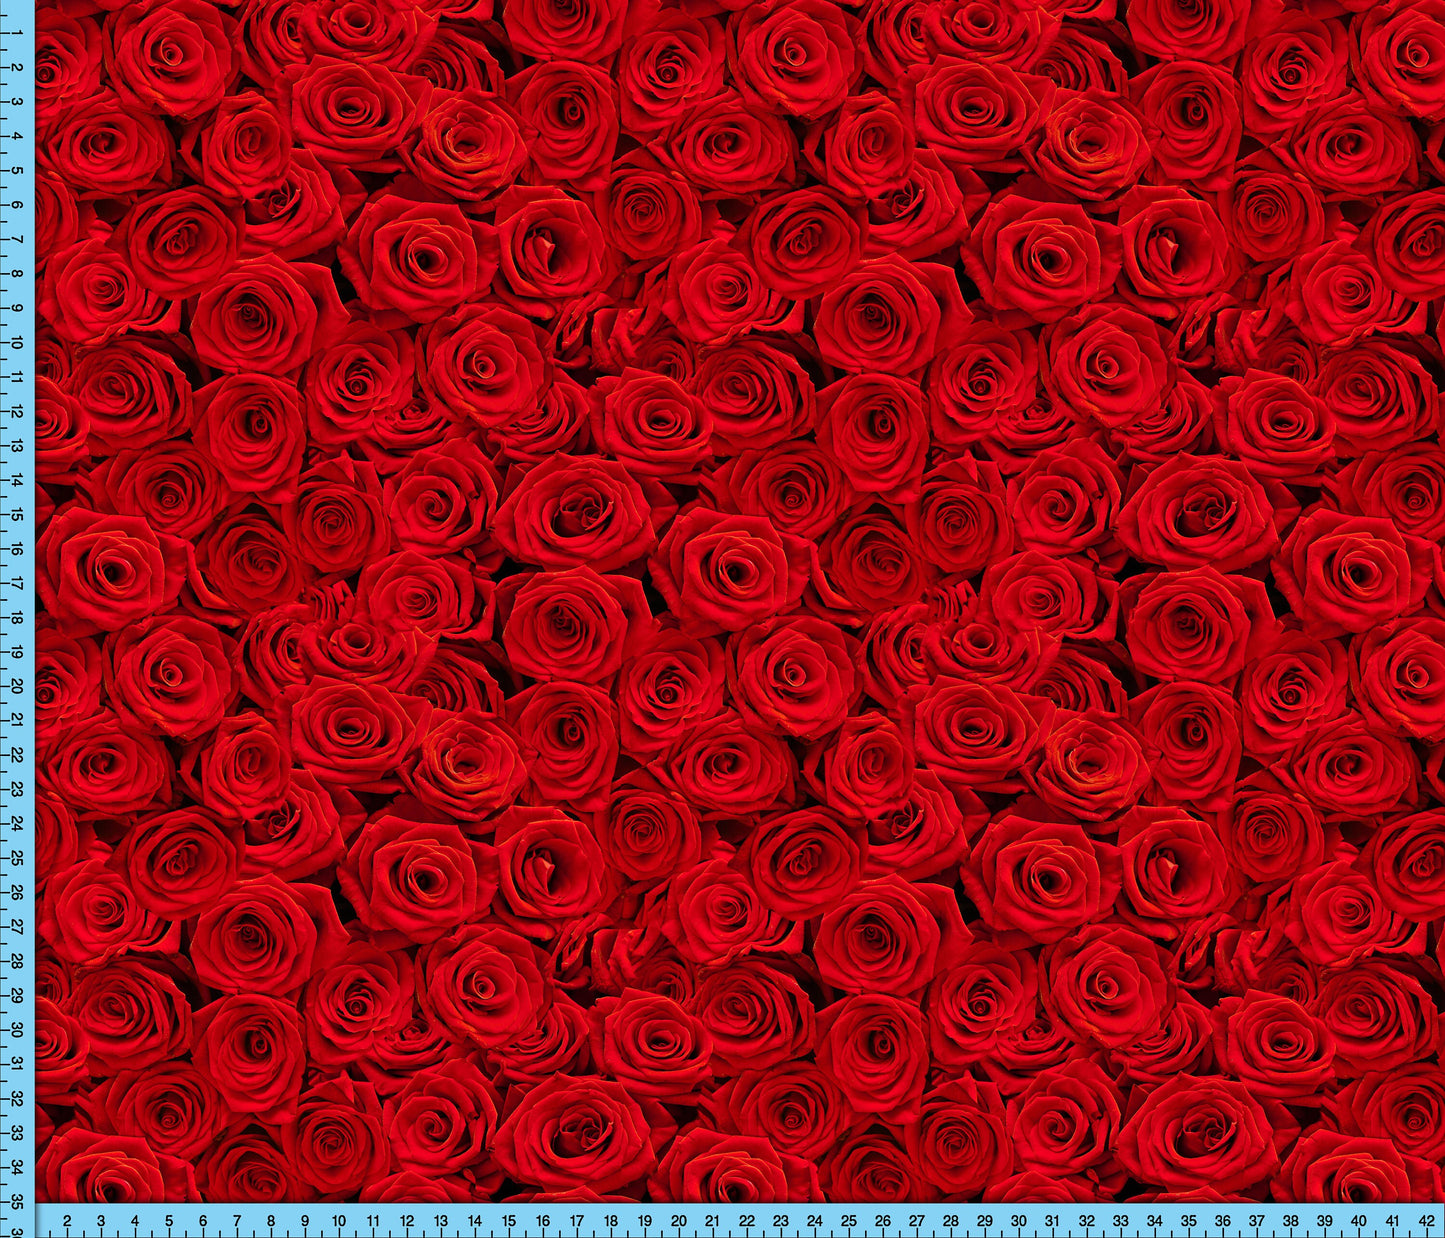 Red Roses Fabric By The Yard, Realistic Red Roses Fabric Printed on your choice of 10 fabrics